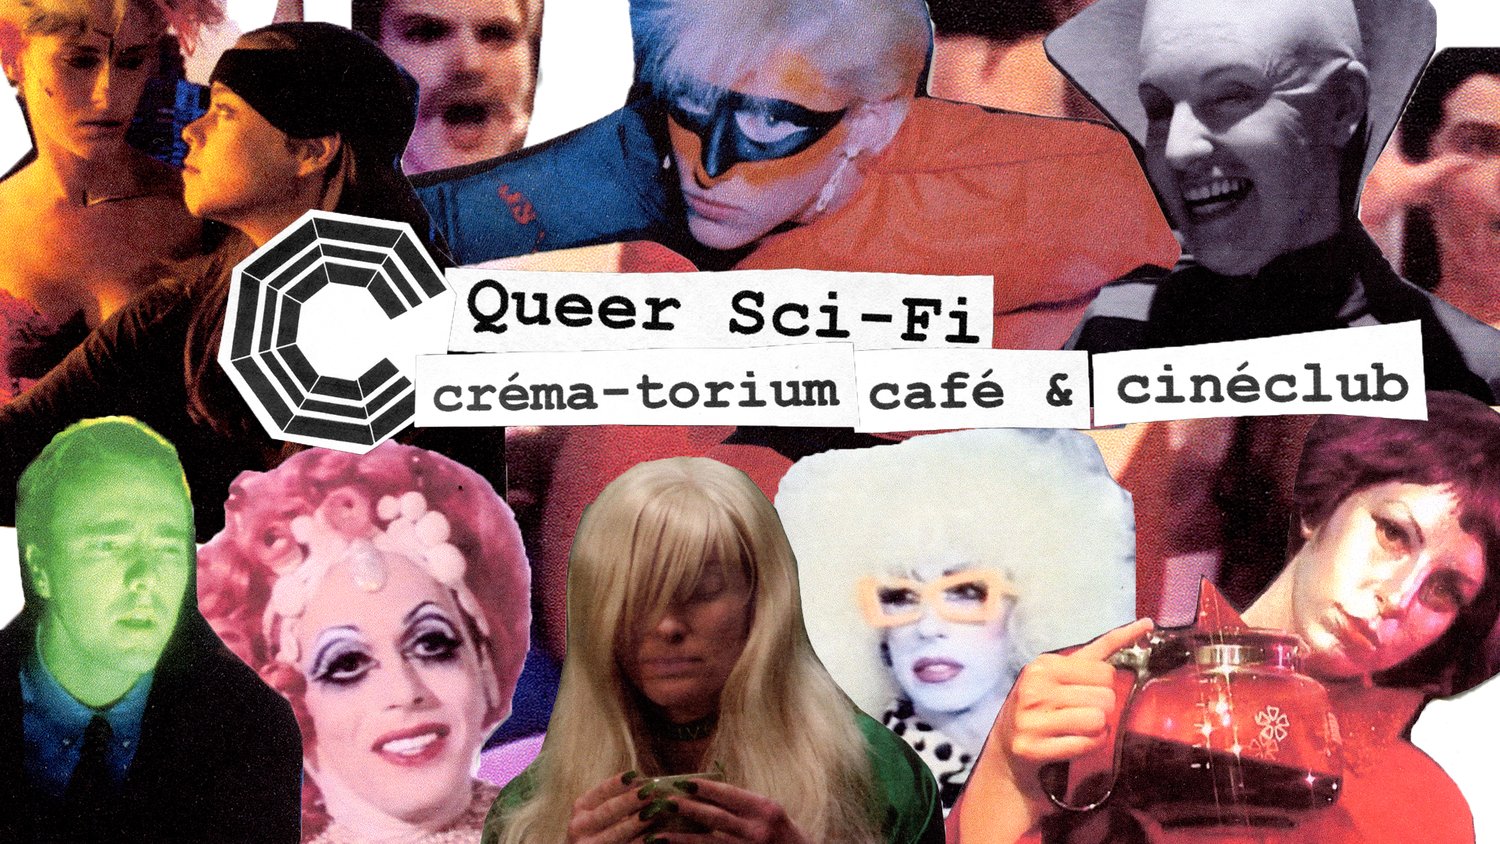 Mervyn creates a collage advertisement for each Créma-torium event, like this one, used to promote the club’s screening of the queer, science-fiction film “Nowhere.”